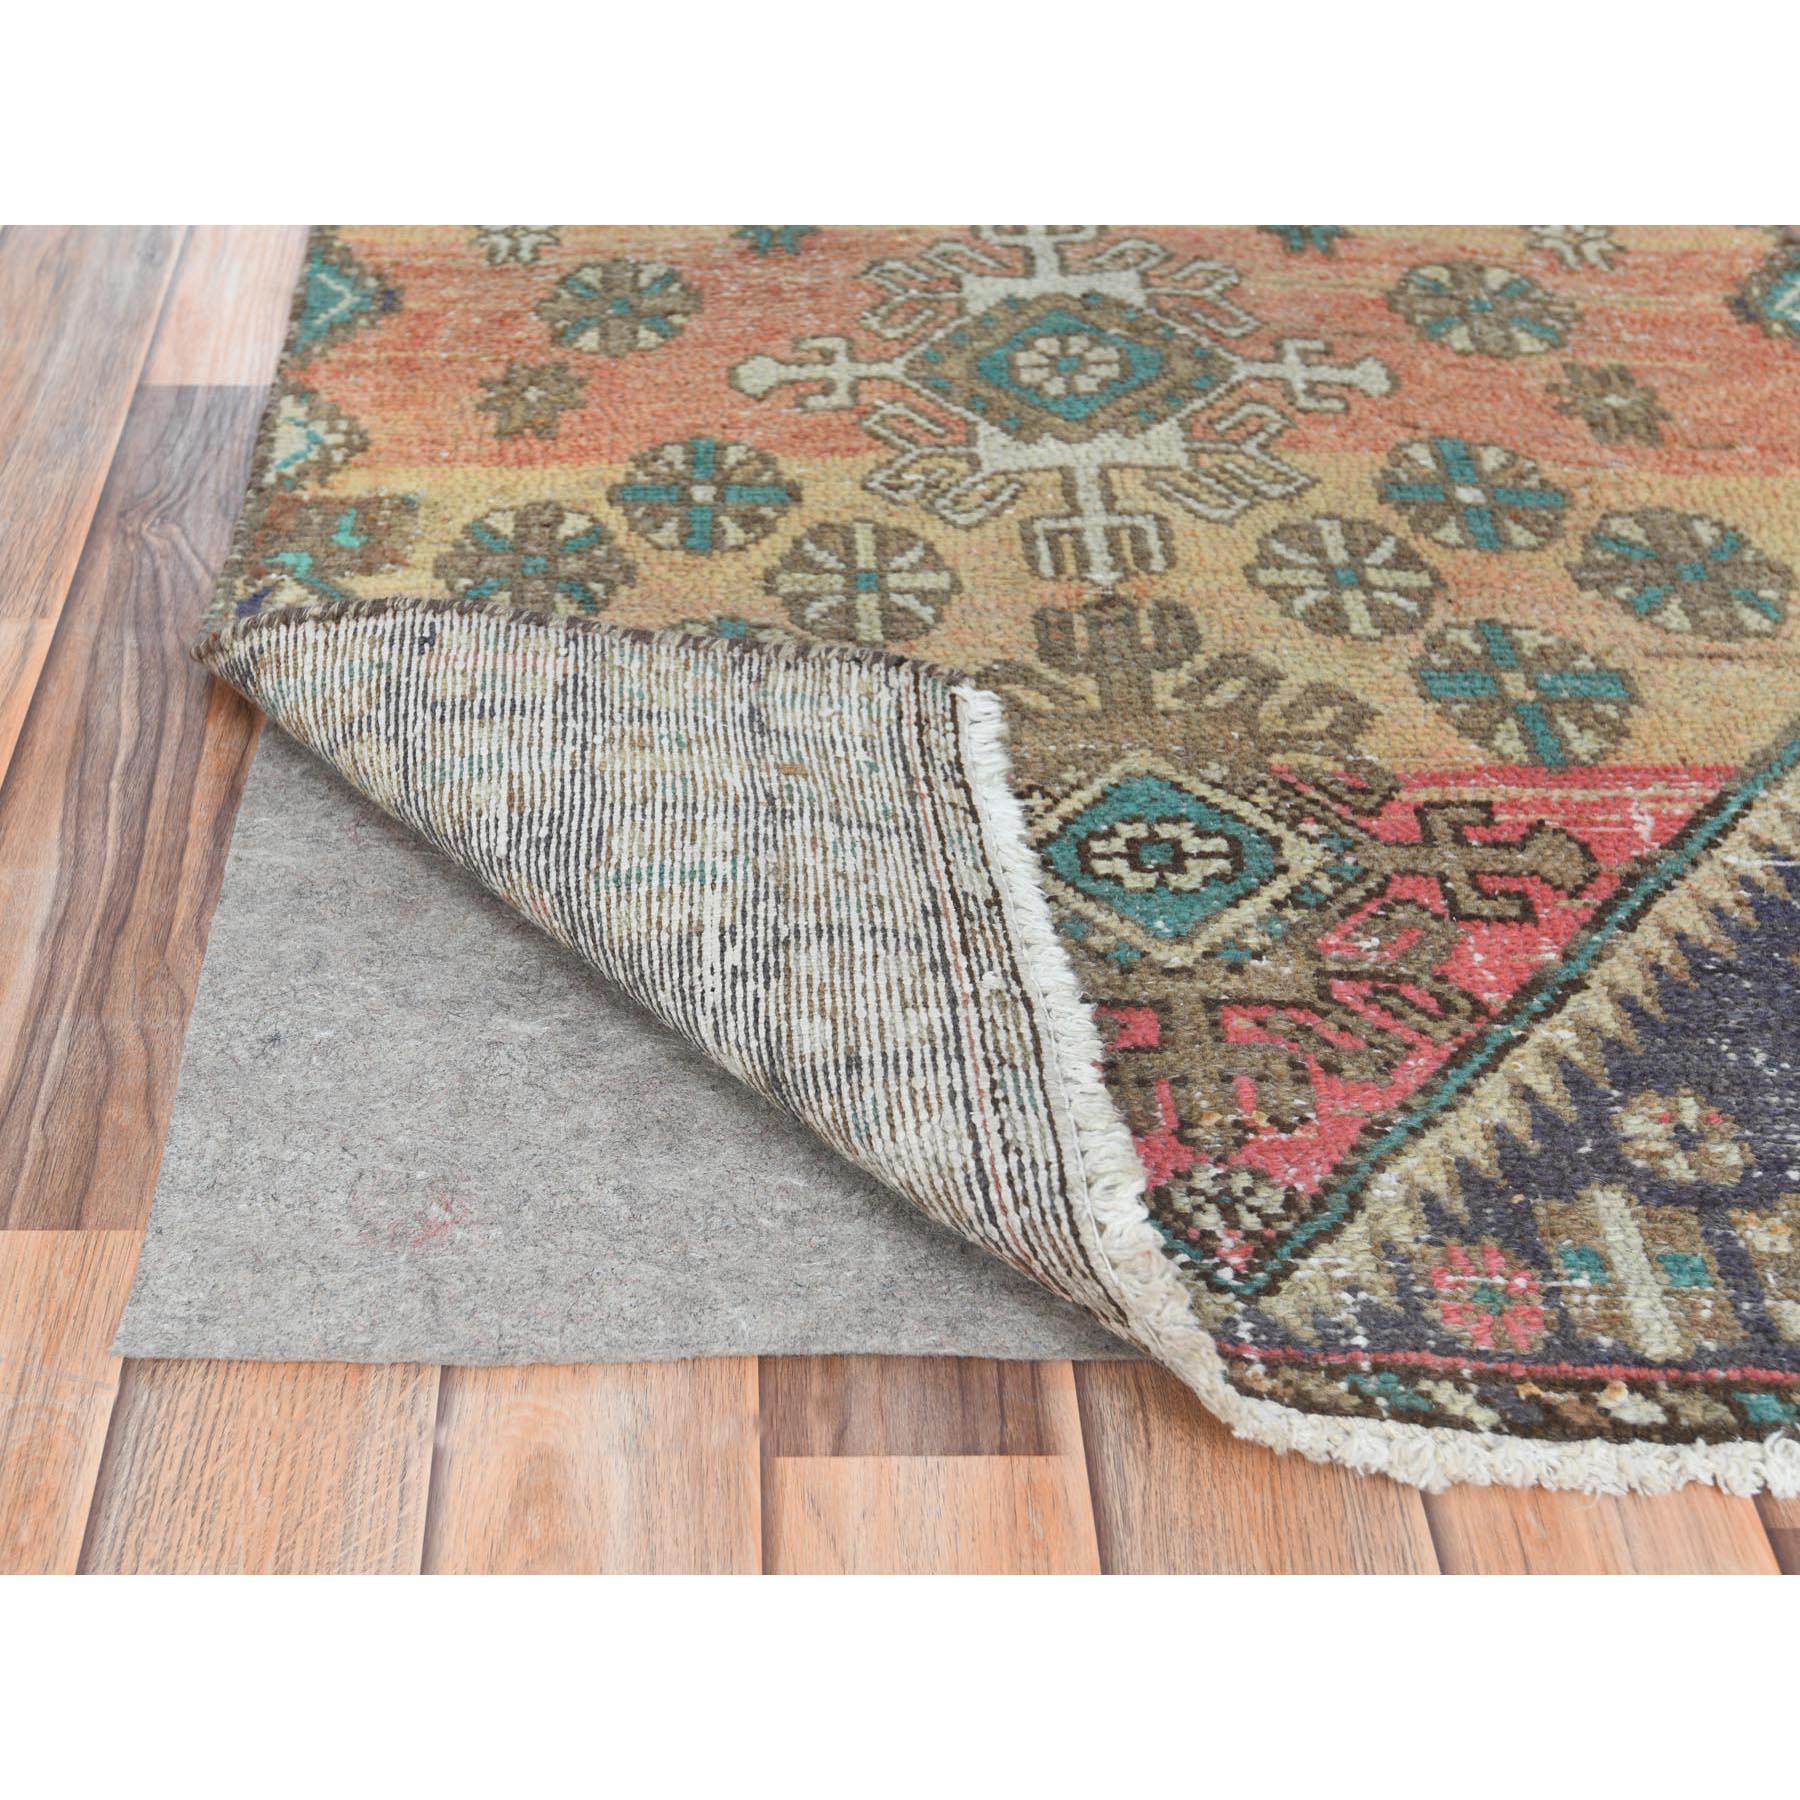 Medieval Sunset Colors, Distressed Worn Wool Hand Knotted, Vintage Persian Bakhtiar Rug For Sale